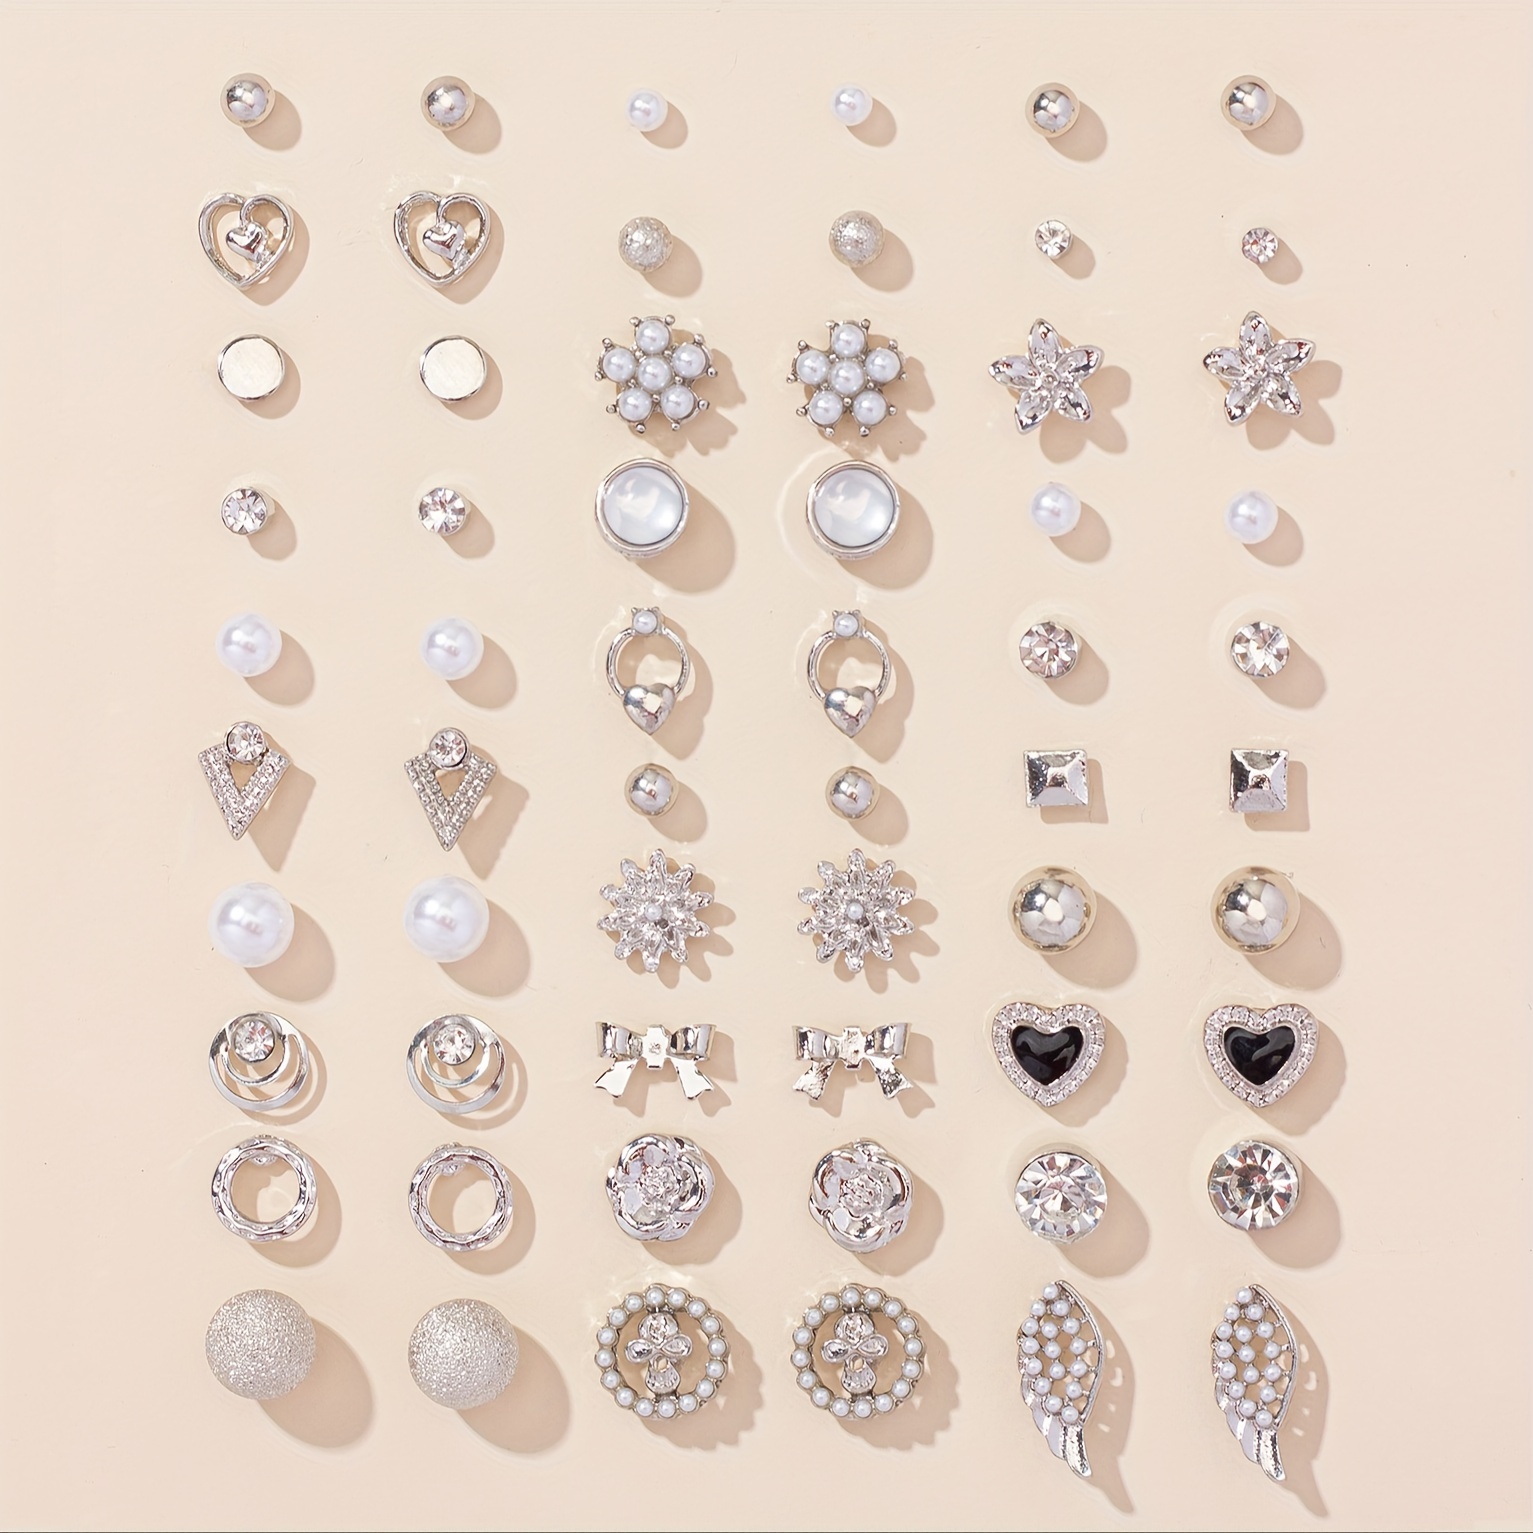 

30 Pairs Set Of Mini Wings Heart Round Shaped Stud Earrings Zinc Alloy Jewelry Rhinestones Inlaid Trendy Female Gift For Women Daily Wear